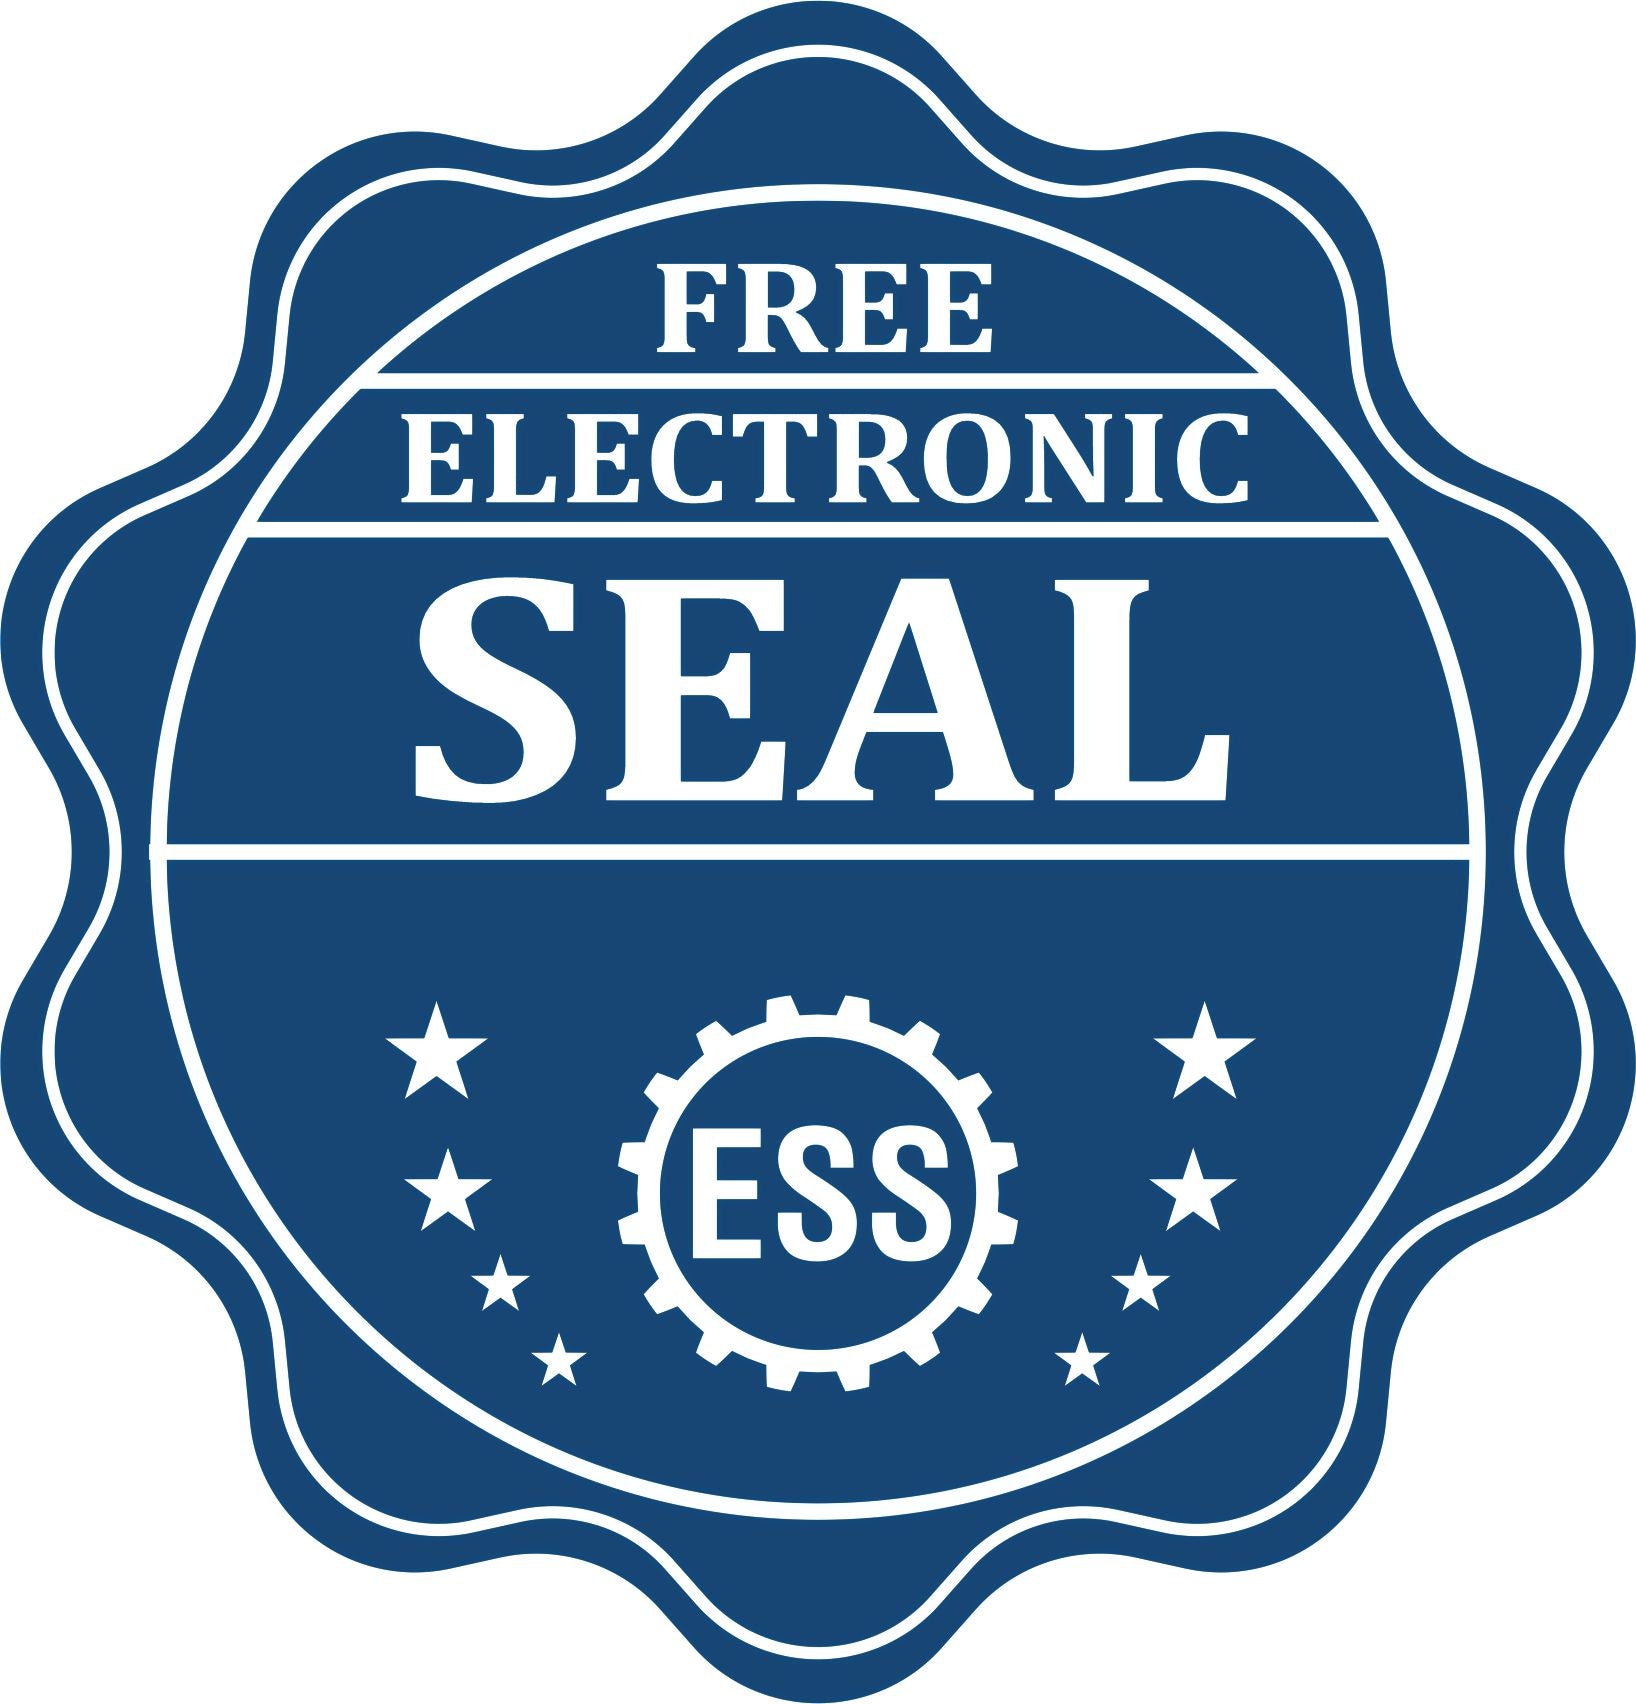 A badge showing a free electronic seal for the State of New York Extended Long Reach Engineer Seal with stars and the ESS gear on the emblem.